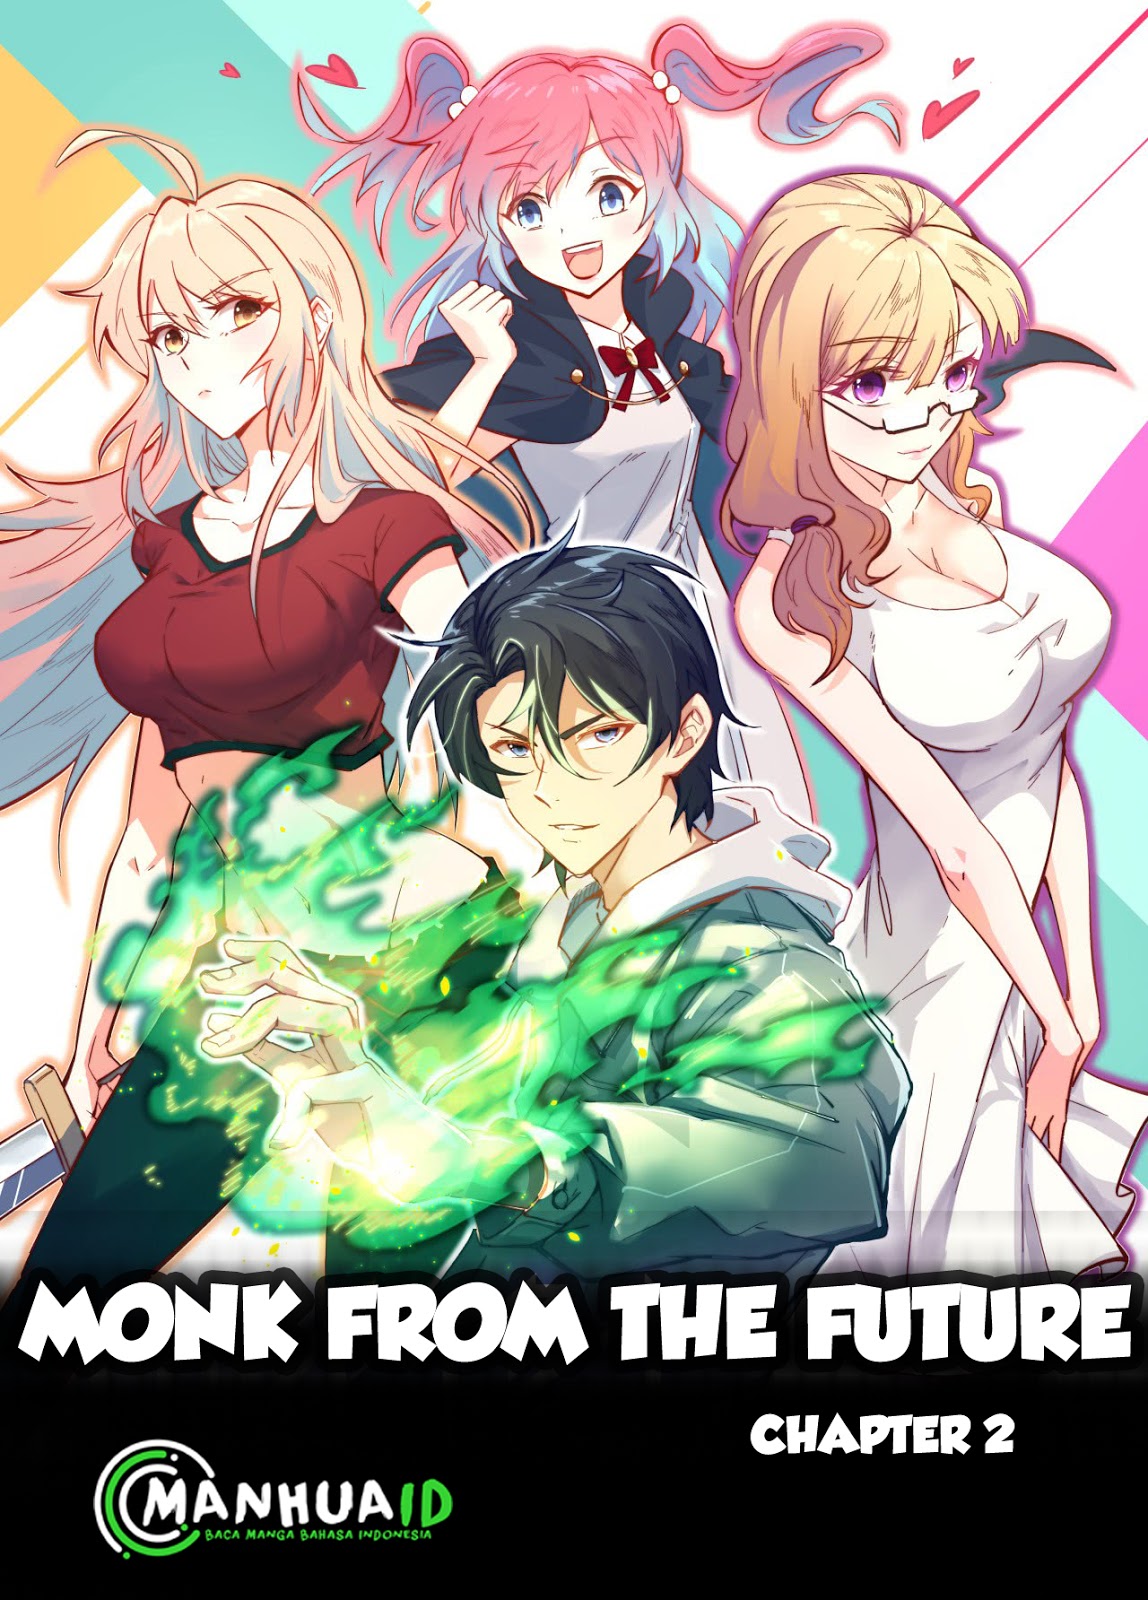 Monk From the Future Chapter 2